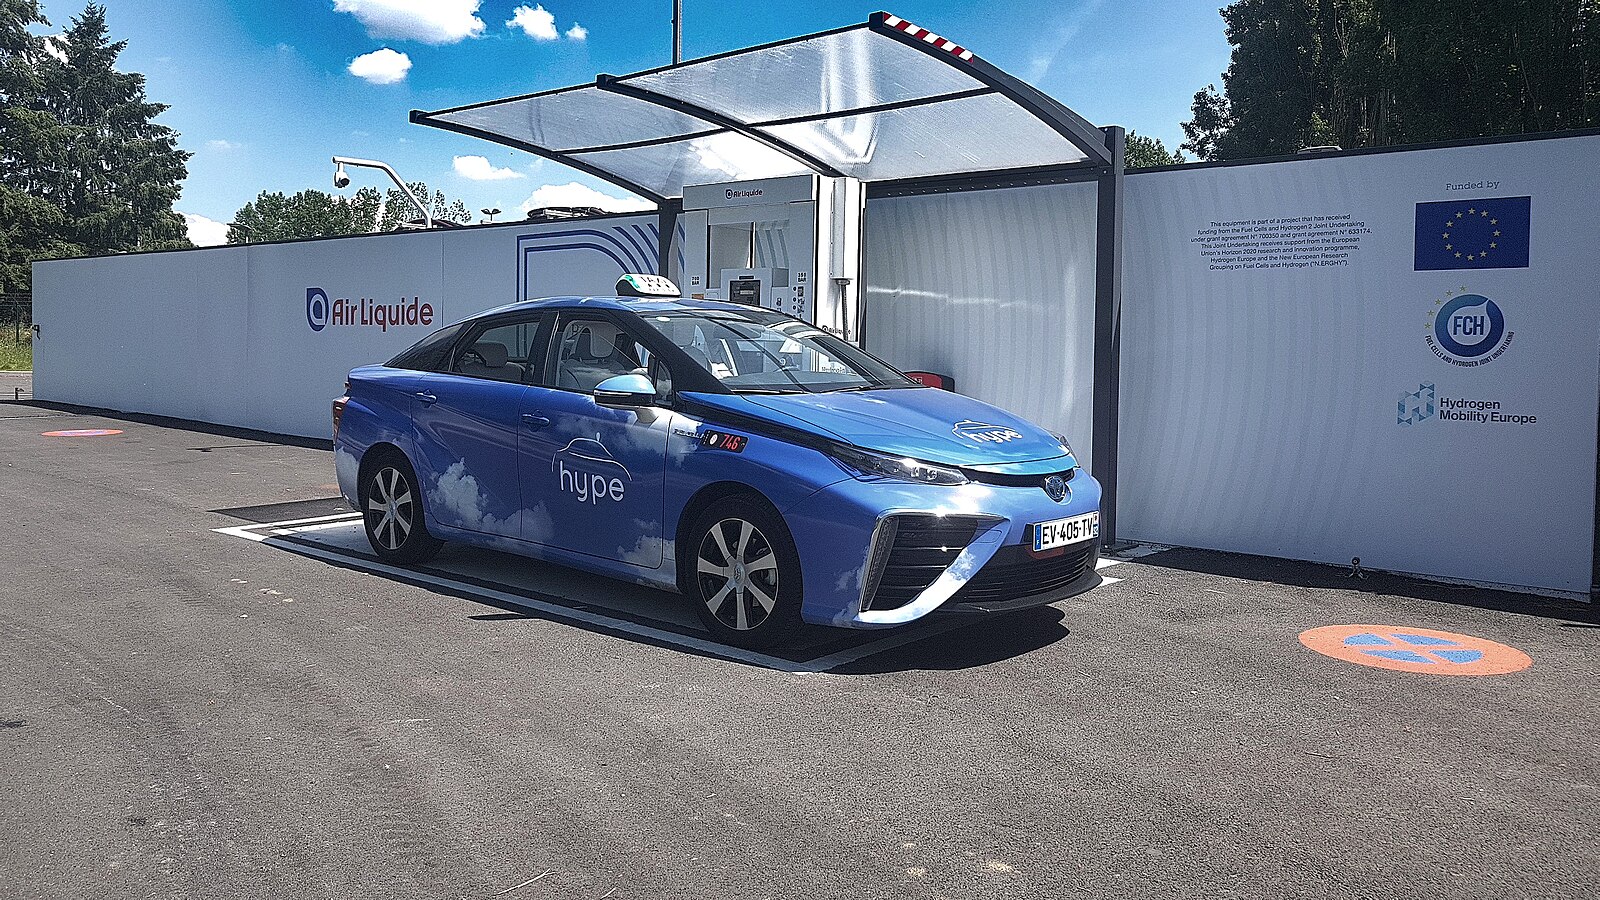 Hydrogen-powered Toyota Mirai owned by hype, the world's first fleet of hydrogen taxis.( Photo Credit: NBKF, CC BY-SA 4.0 DEED )